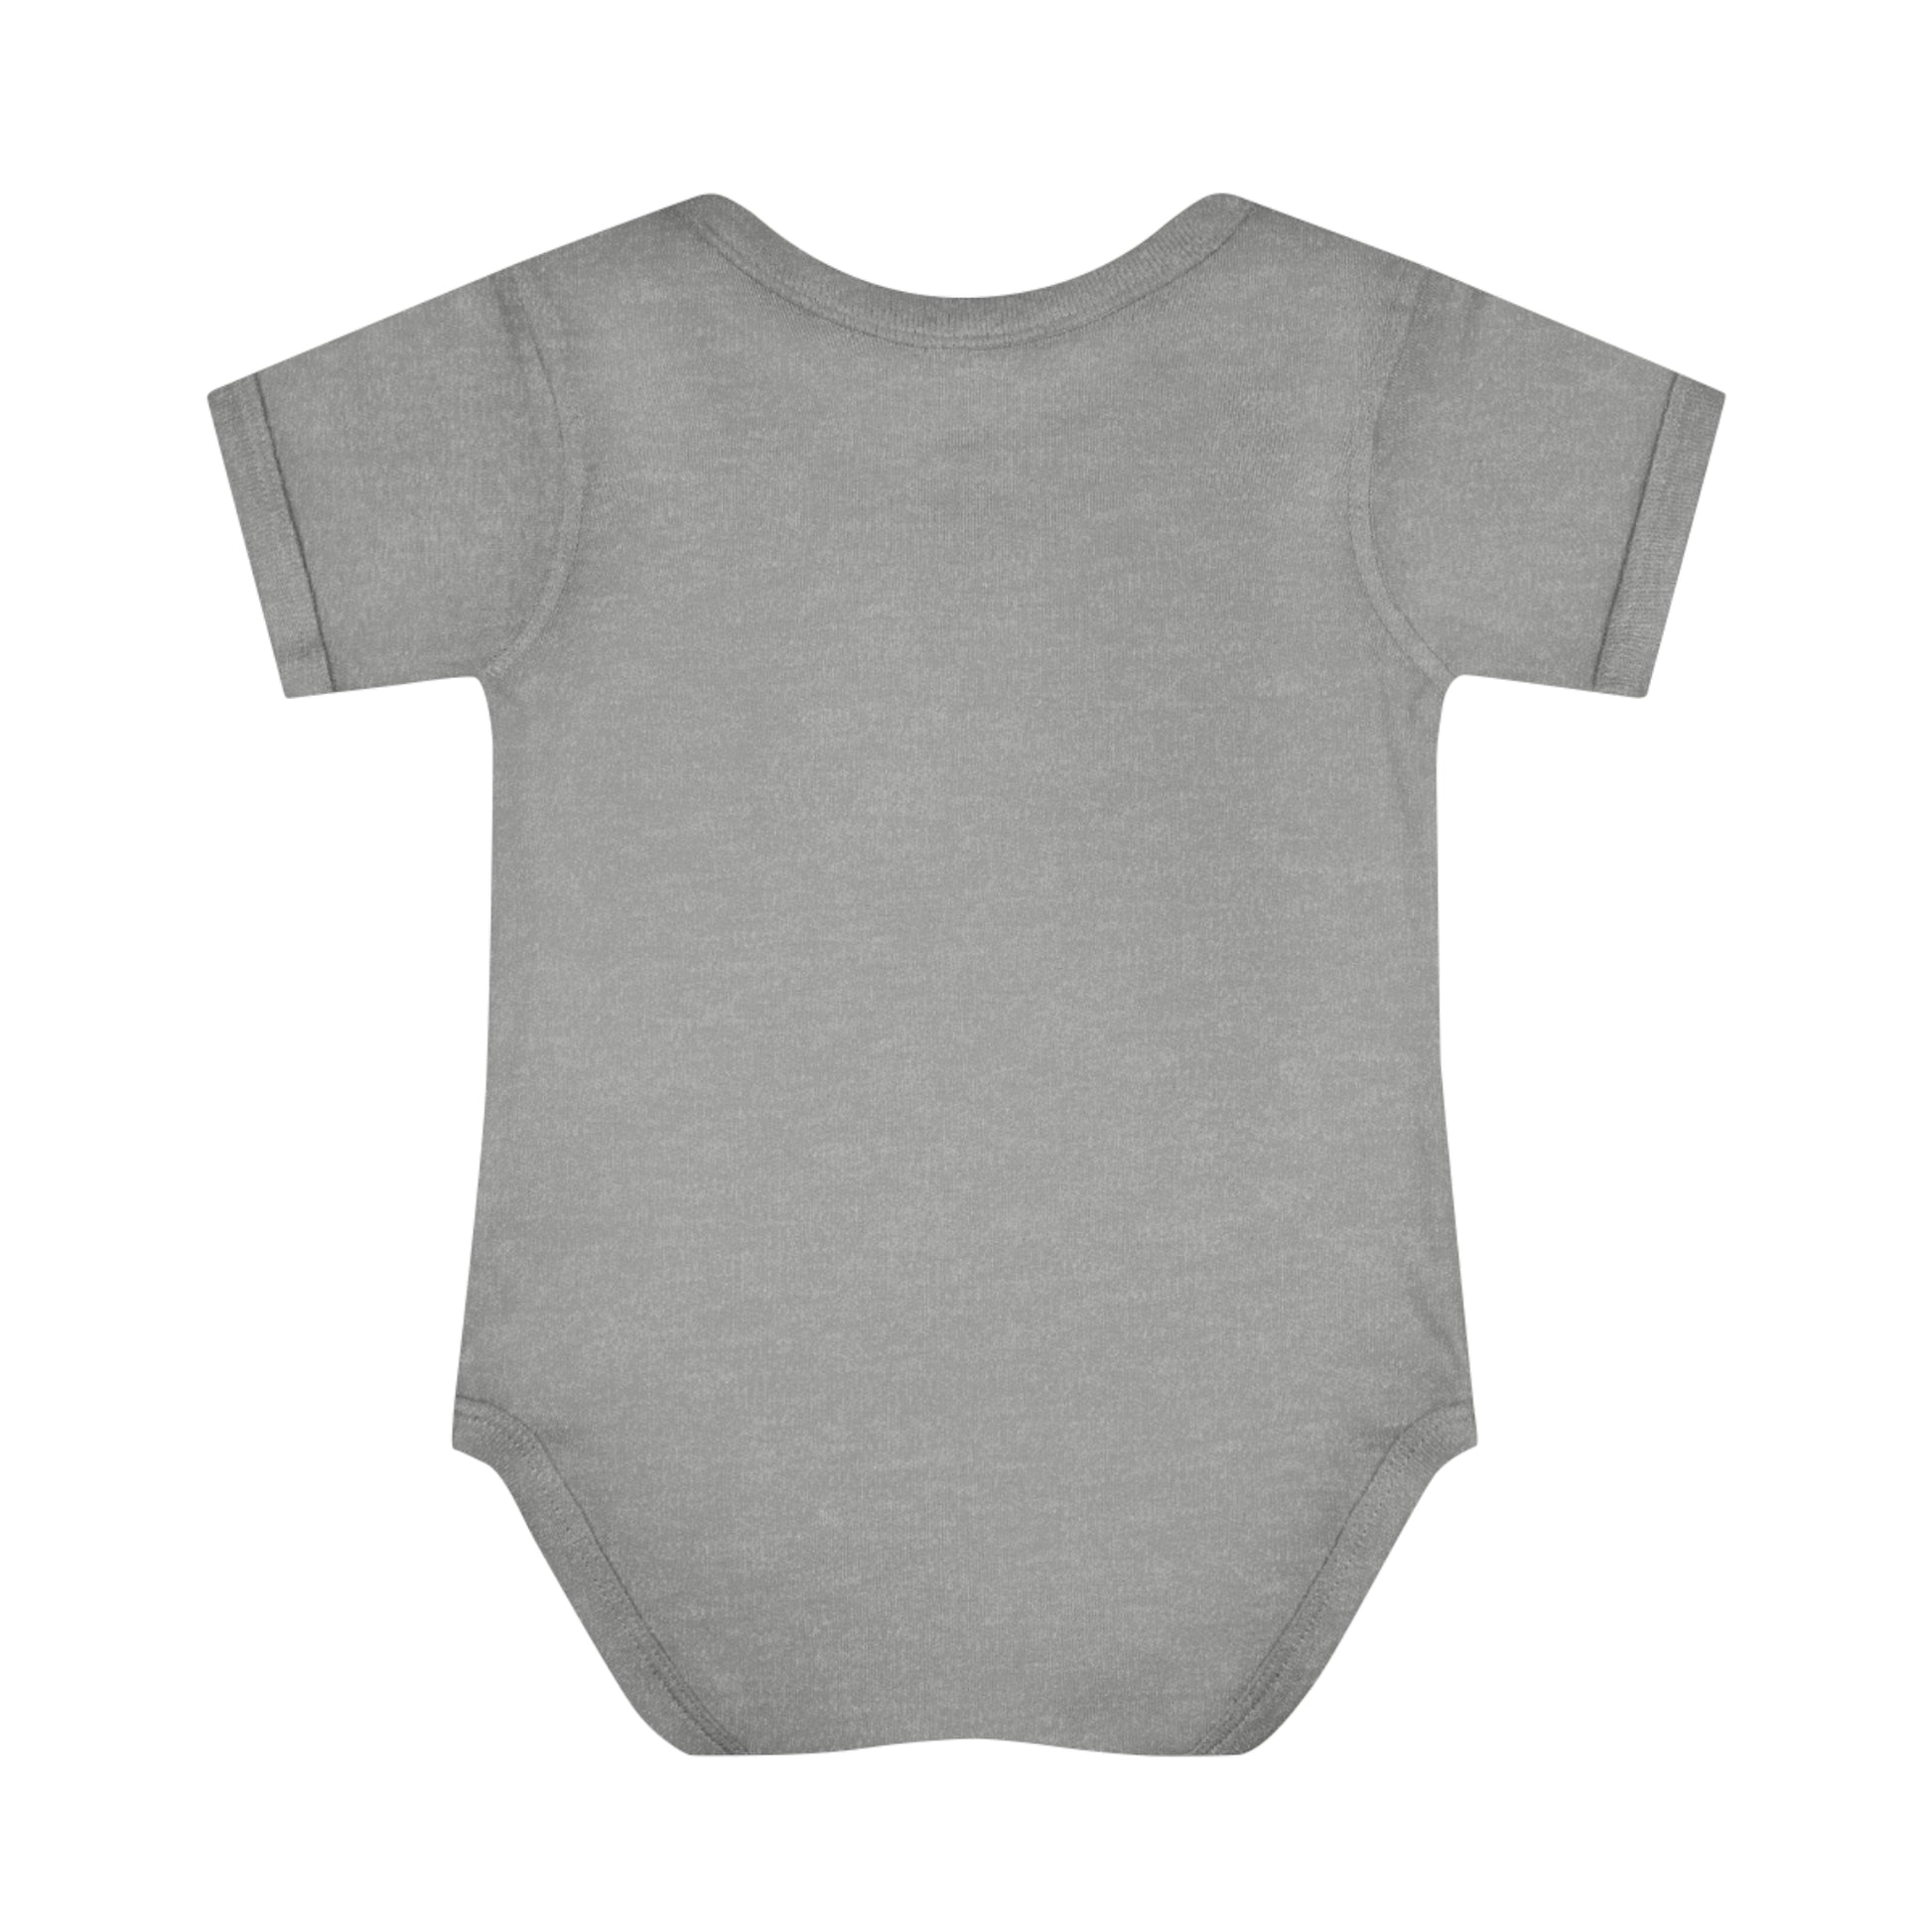 Born For Such A Time As This Christian Baby Onesie Printify